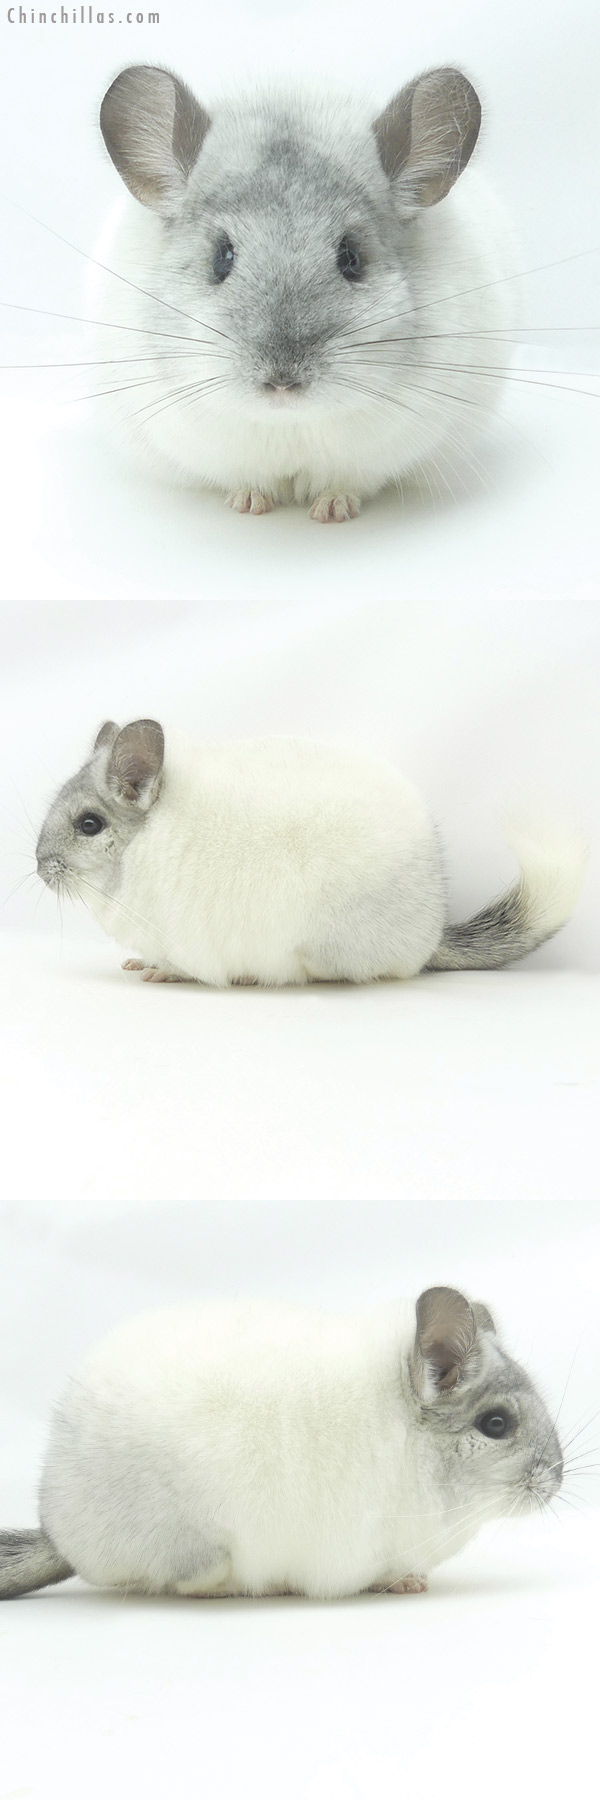 Chinchilla or related item offered for sale or export on Chinchillas.com - 20107 Large Blocky Premium Production Quality White Mosaic Female Chinchilla